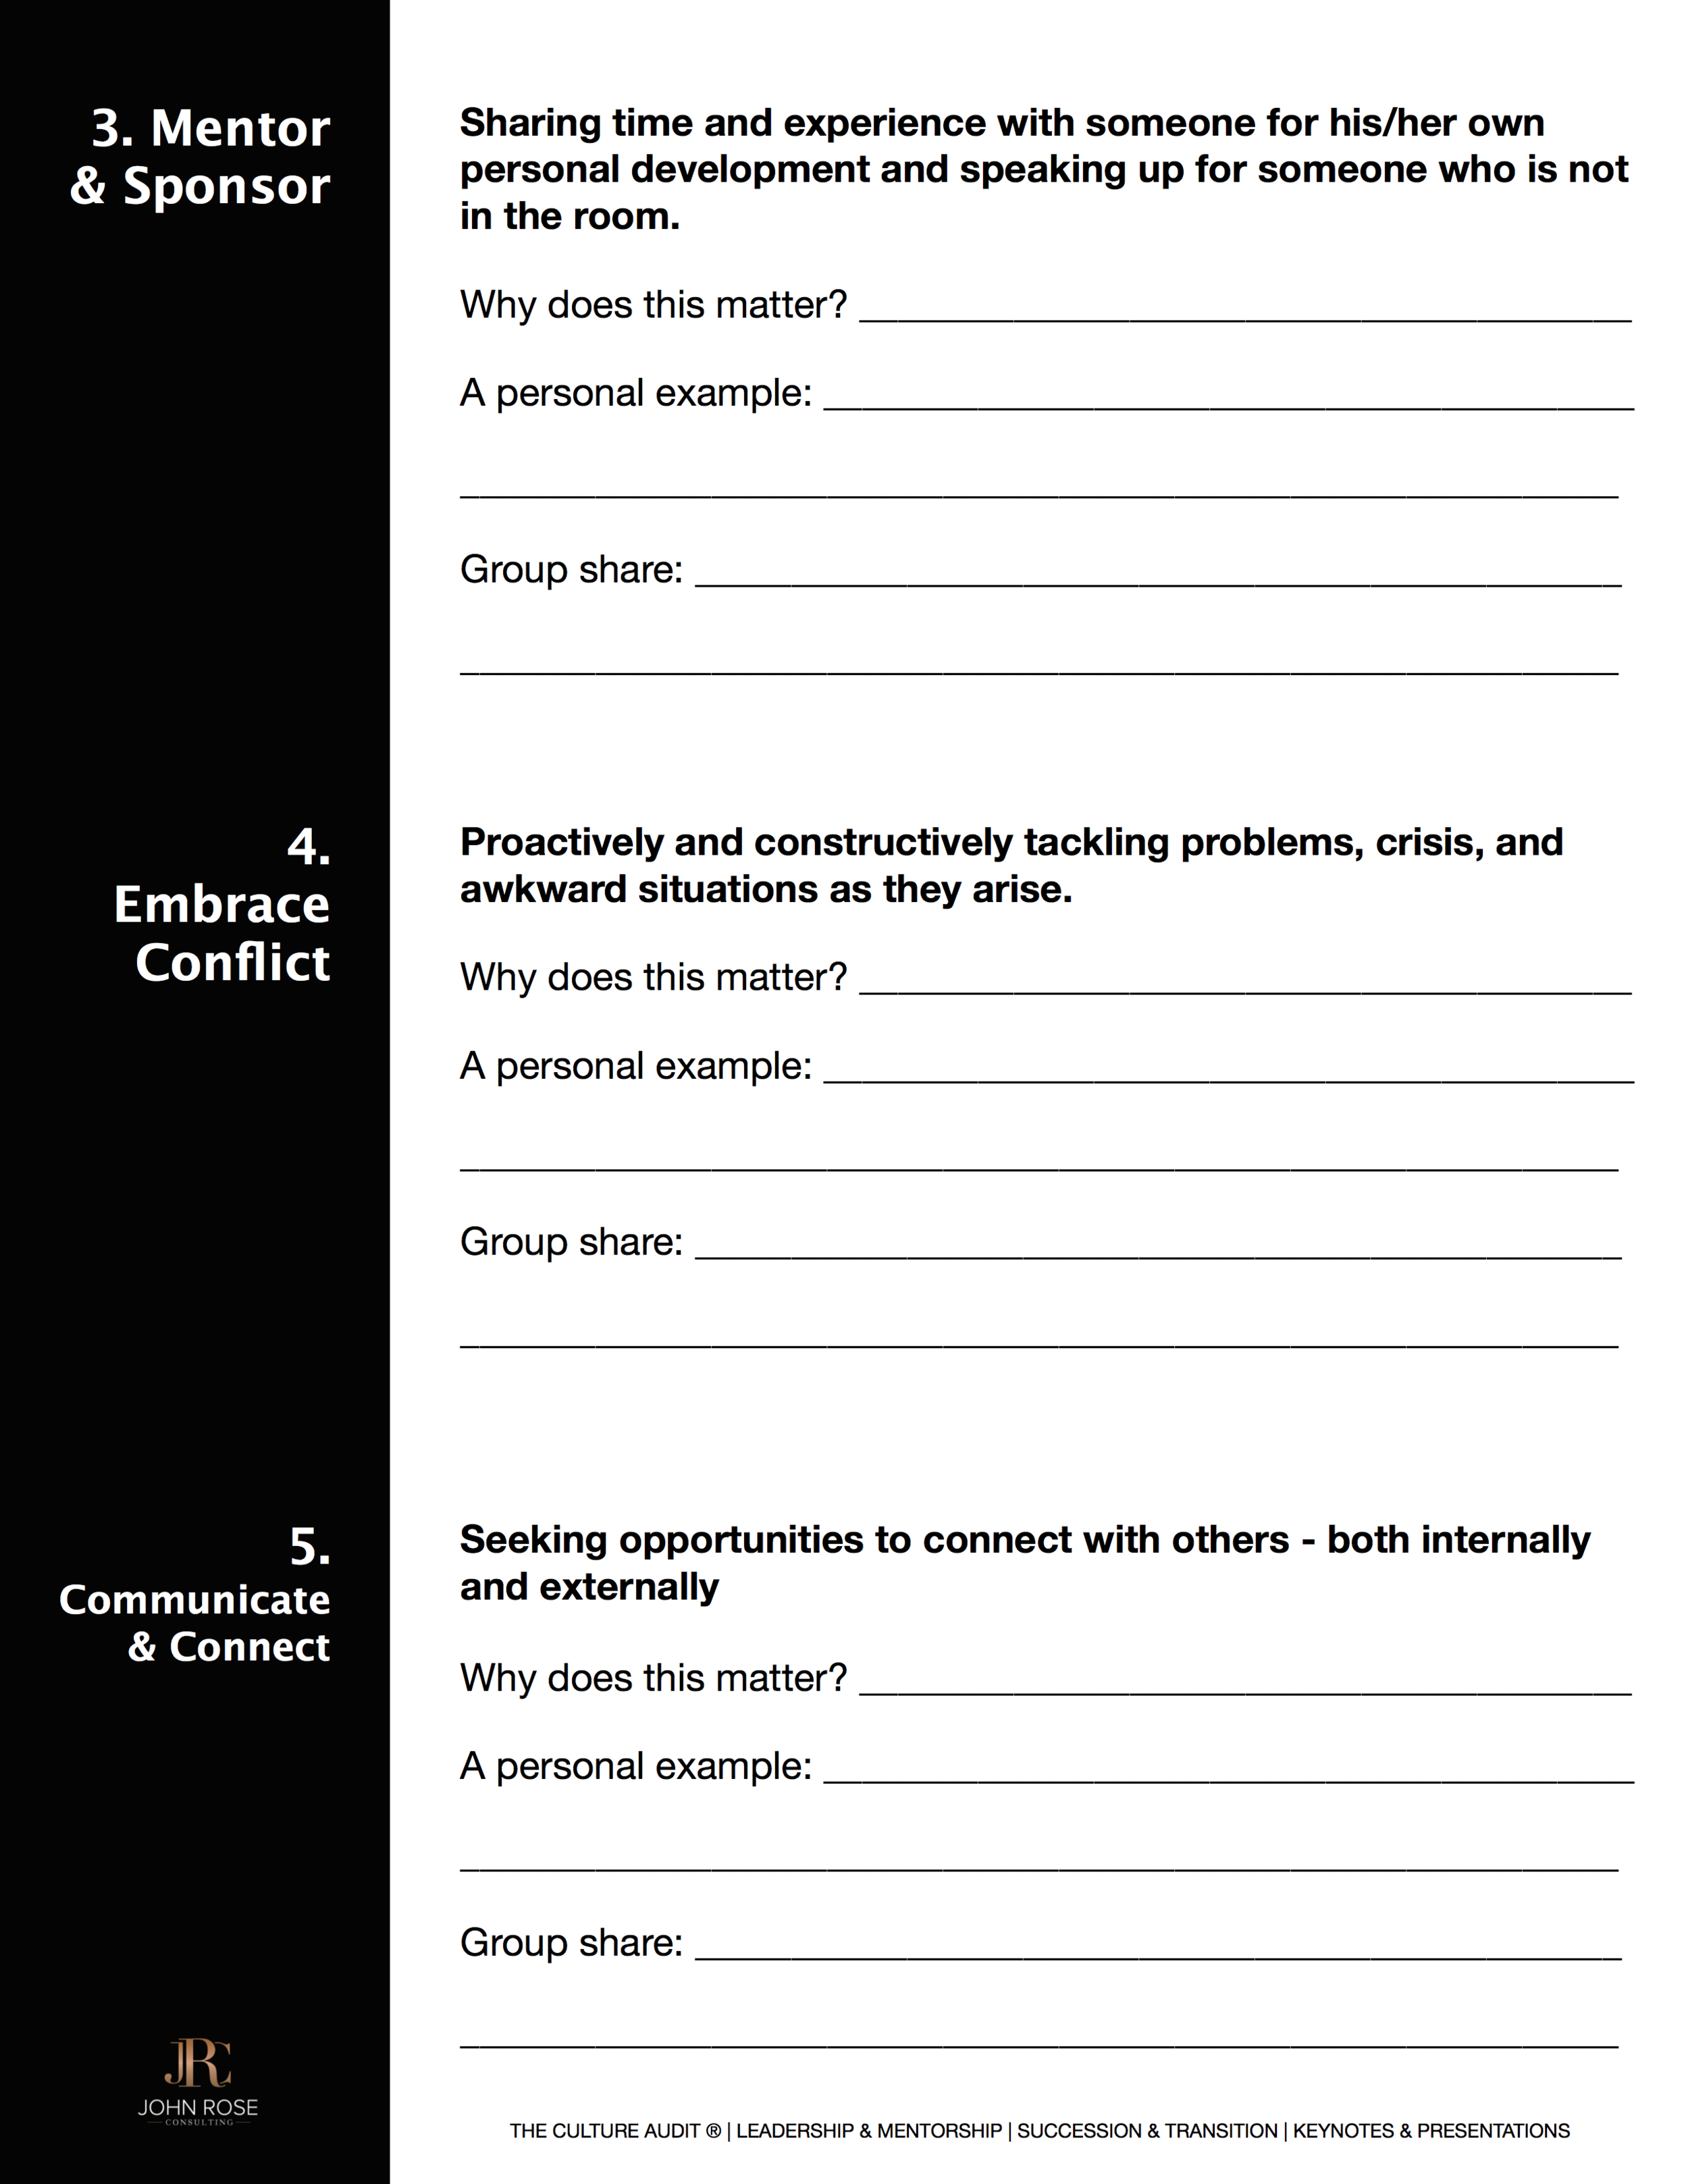 Five Essentials to Shape and Inspire Leadership Handout (Template) (dragged) 3.png